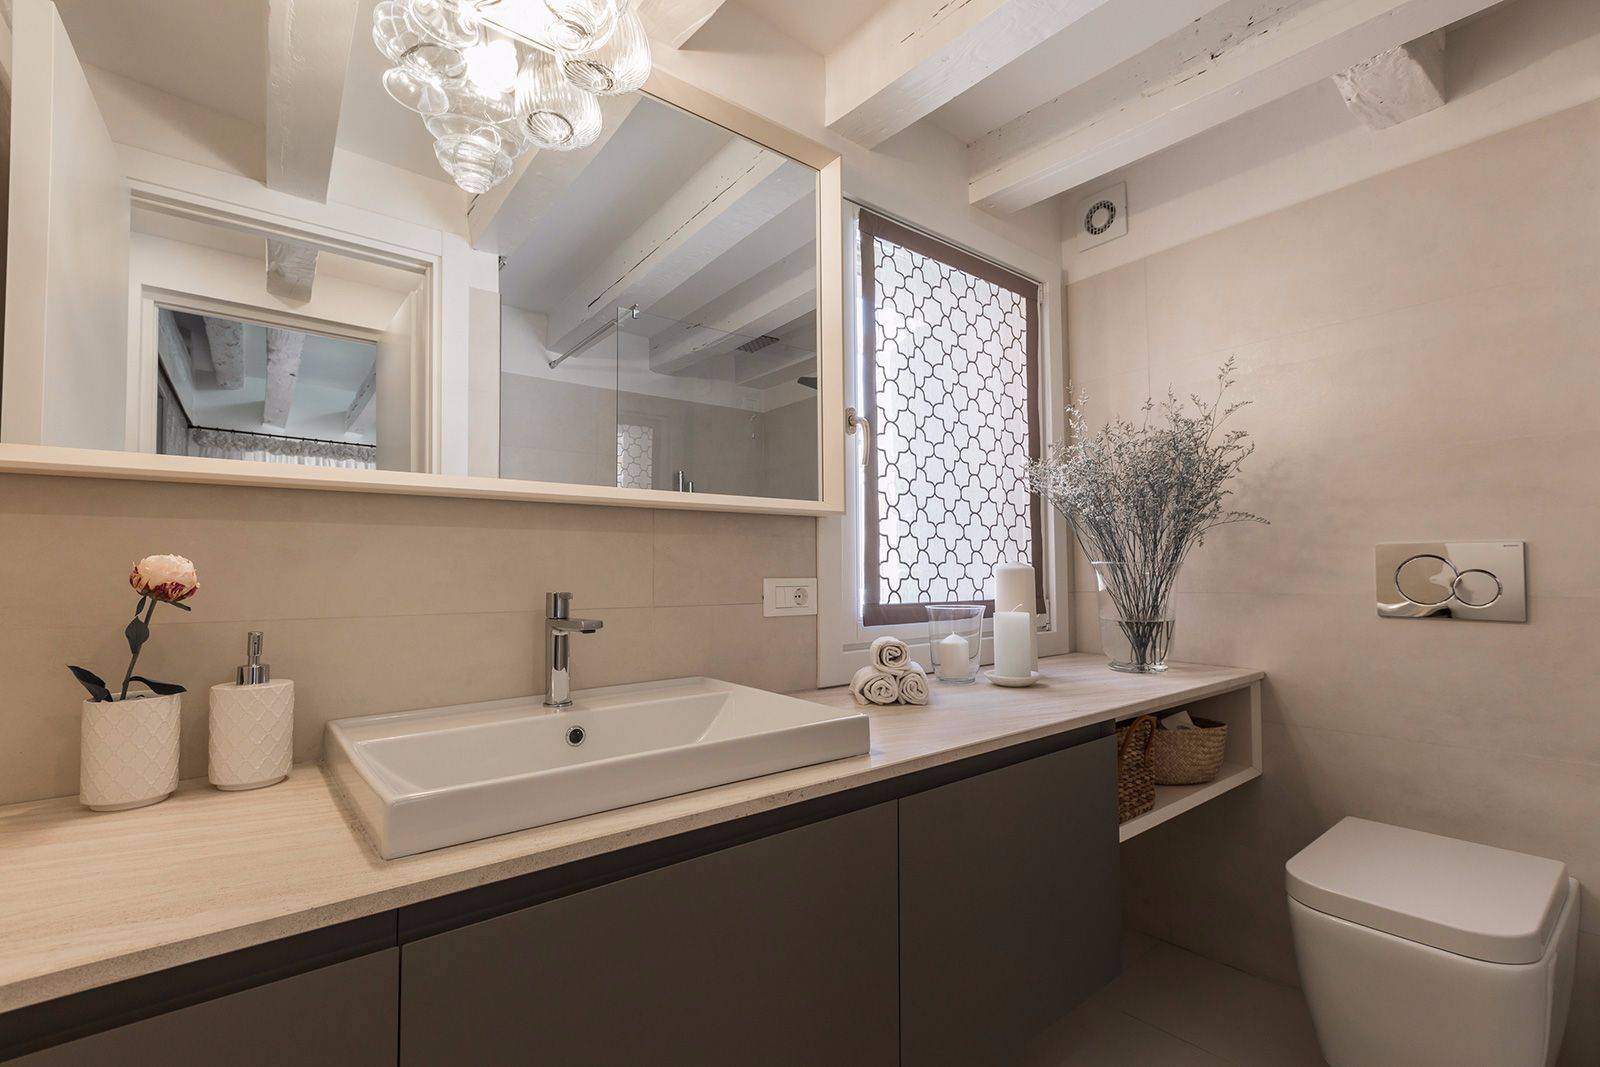 the stylish bathroom will please the most demanding guest